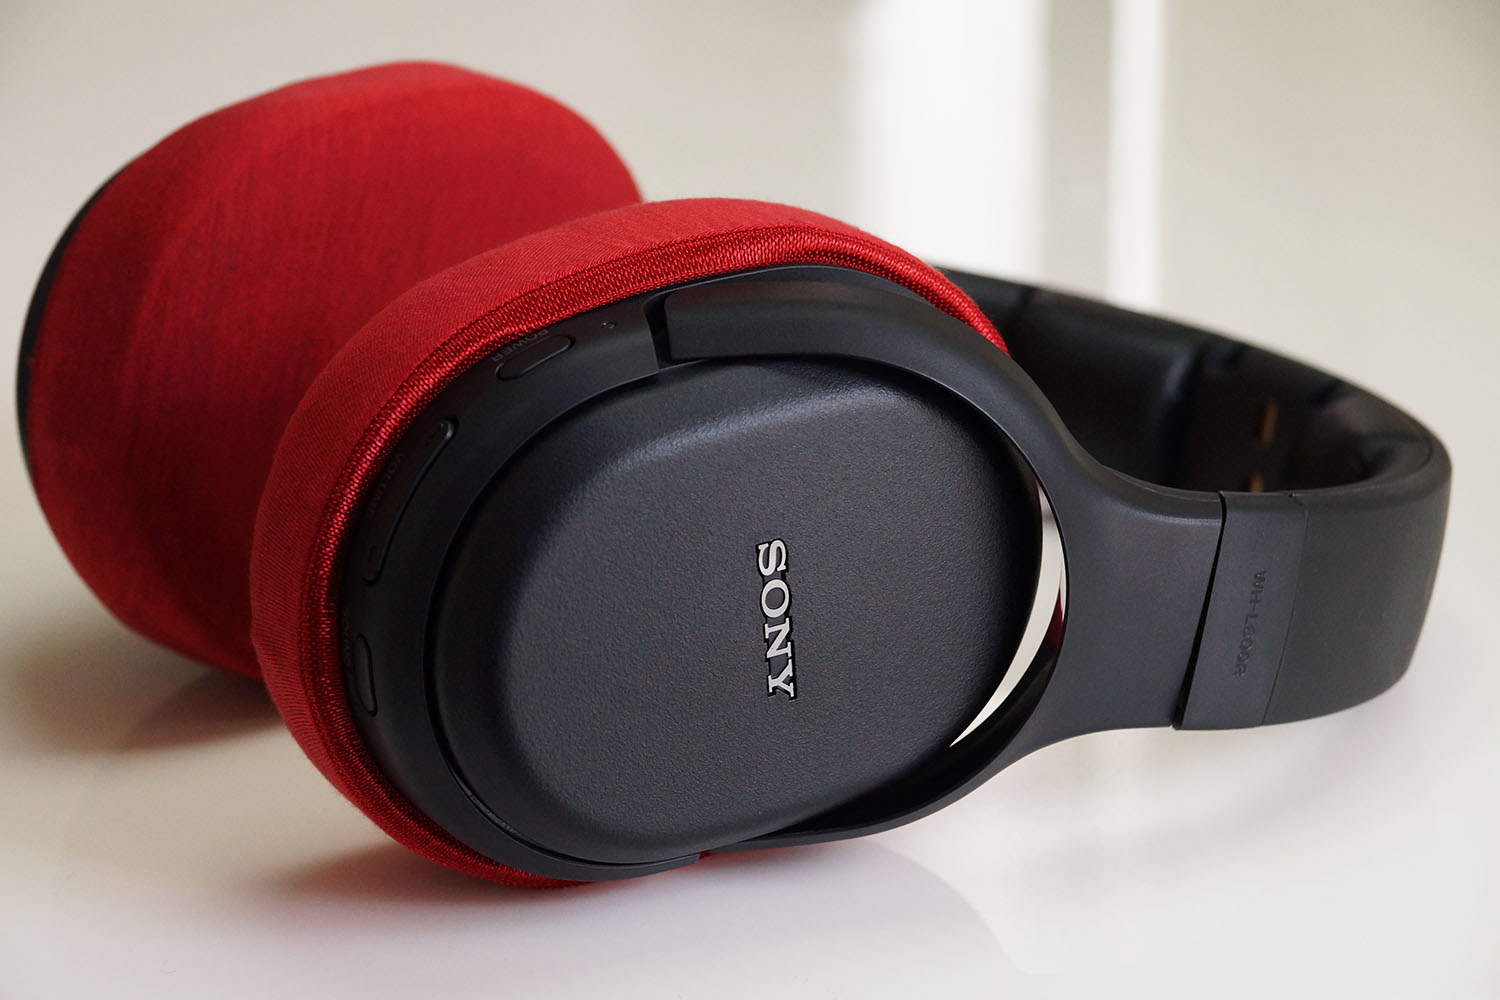 SONY WH-L600 earpad repair and protection: Super Stretch Headphone